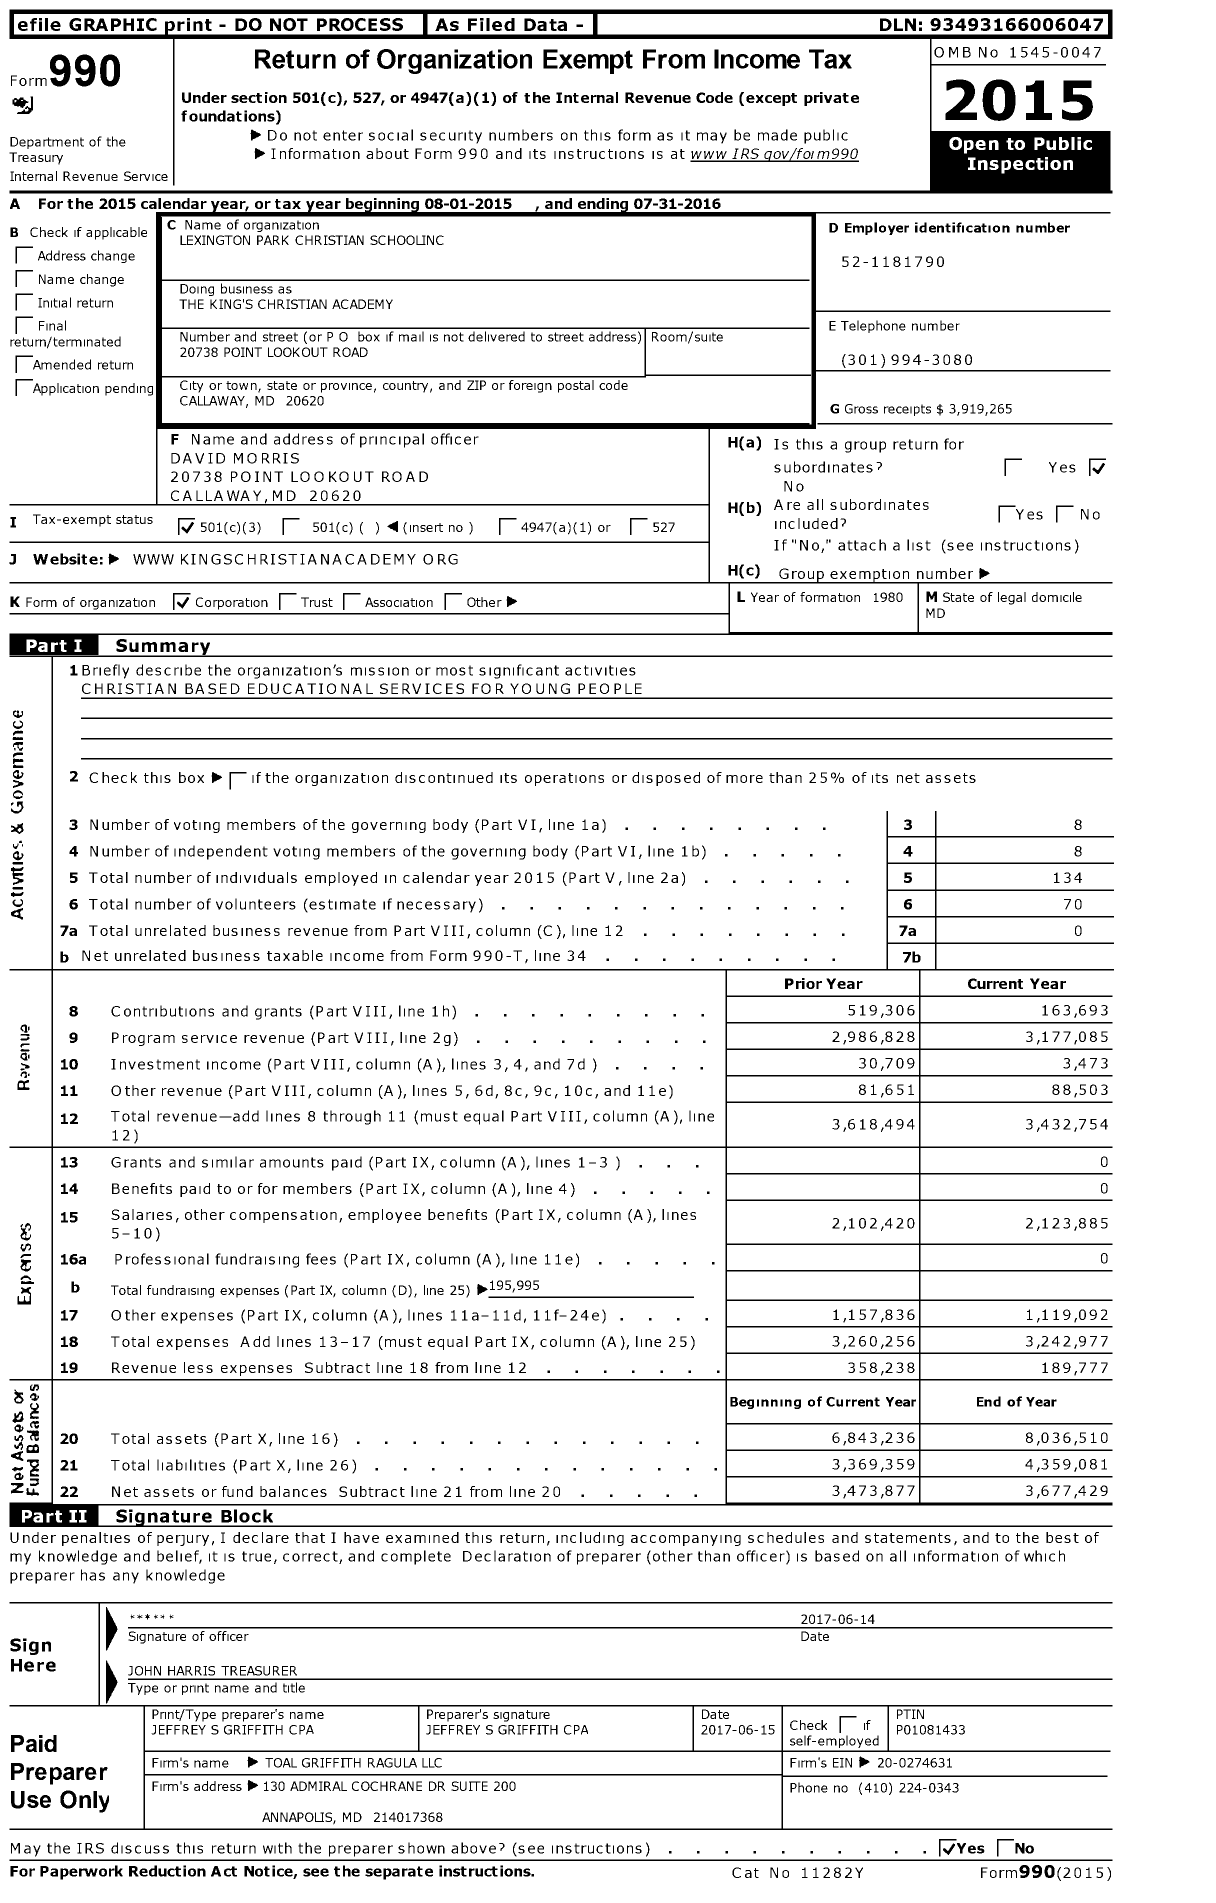 Image of first page of 2015 Form 990 for King's Christian Academy (KCA)